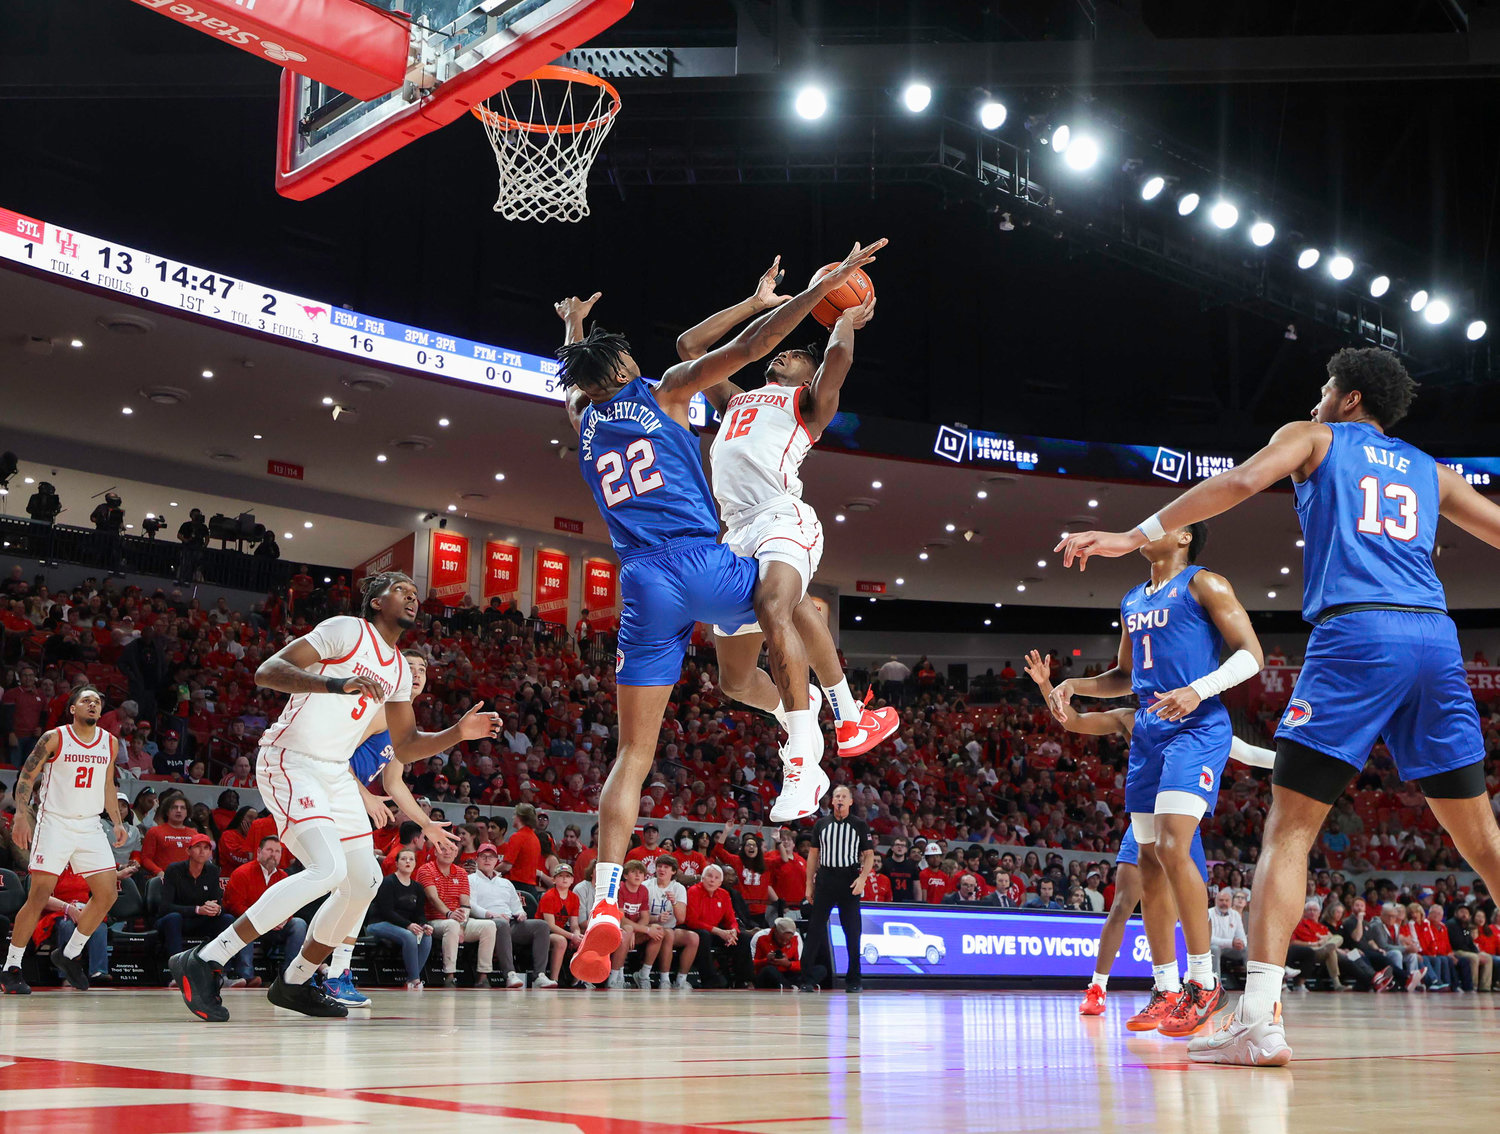 Houston guard Tramon Mark (12) goes to the basket against SMU forward Keon Ambrose-Hylton (22) during an NCAA men’s basketball game between the Houston Cougars and the Southern Methodist Mustangs on Jan. 5, 2023 in Houston. Houston won, 87-53,